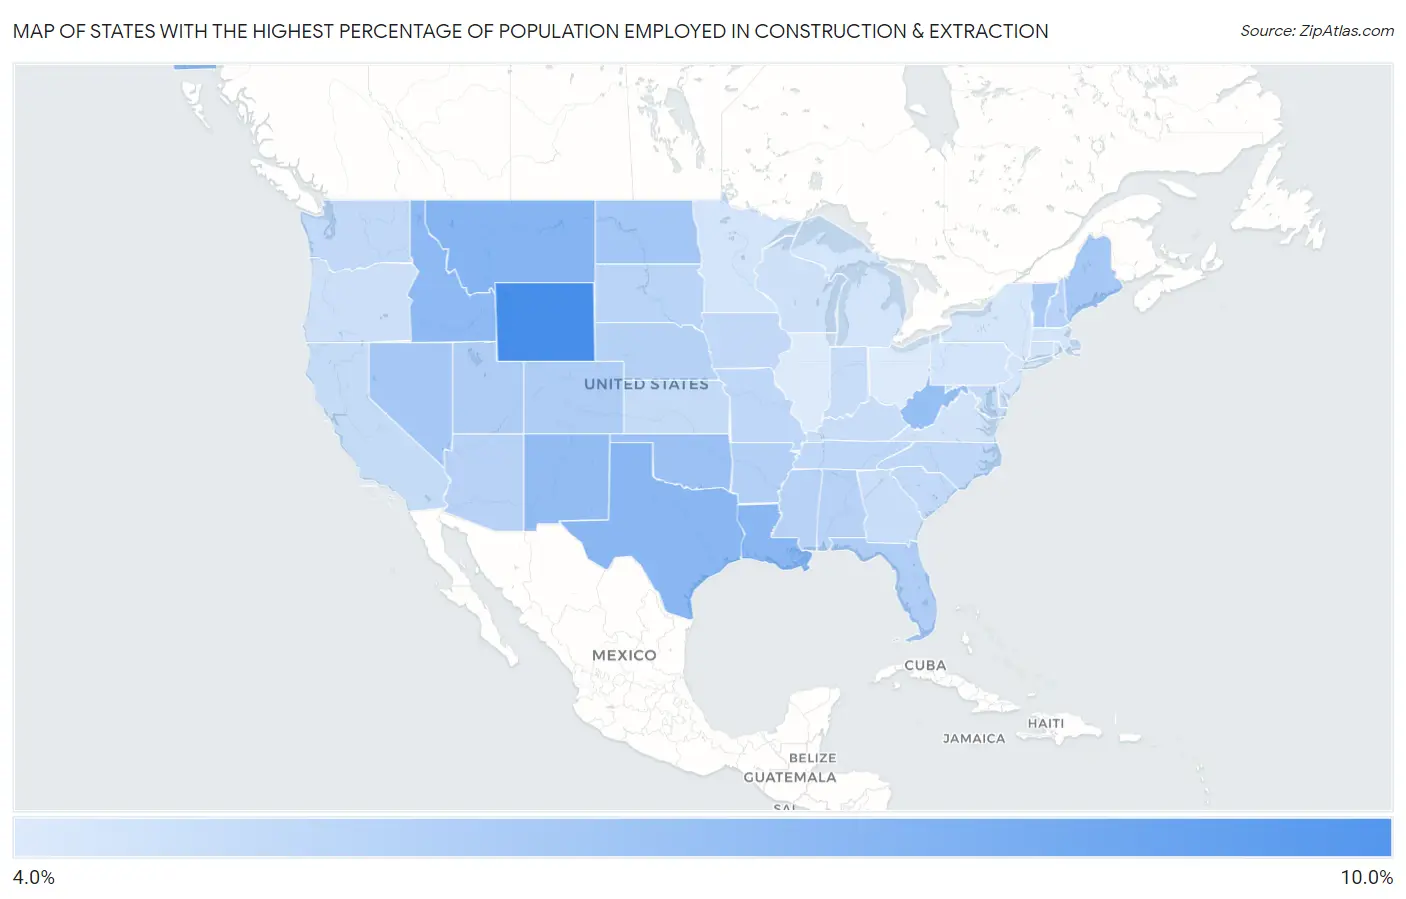 States with the Highest Percentage of Population Employed in Construction & Extraction in the United States Map